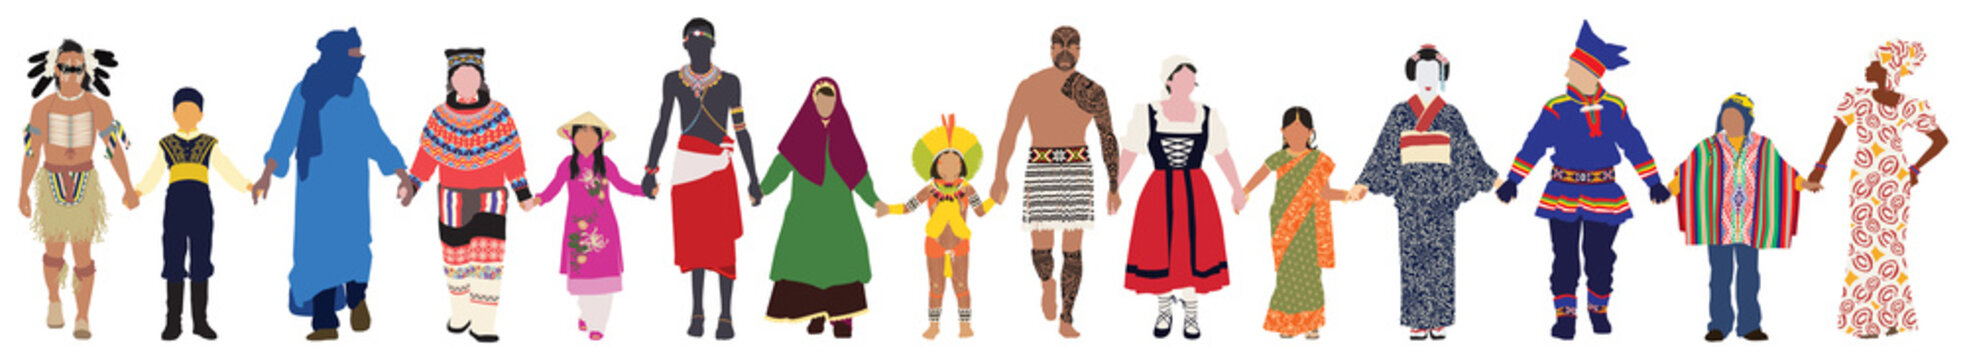 Vector people of different ages, races and genders in their traditional clothing walk together peacefully hand in hand